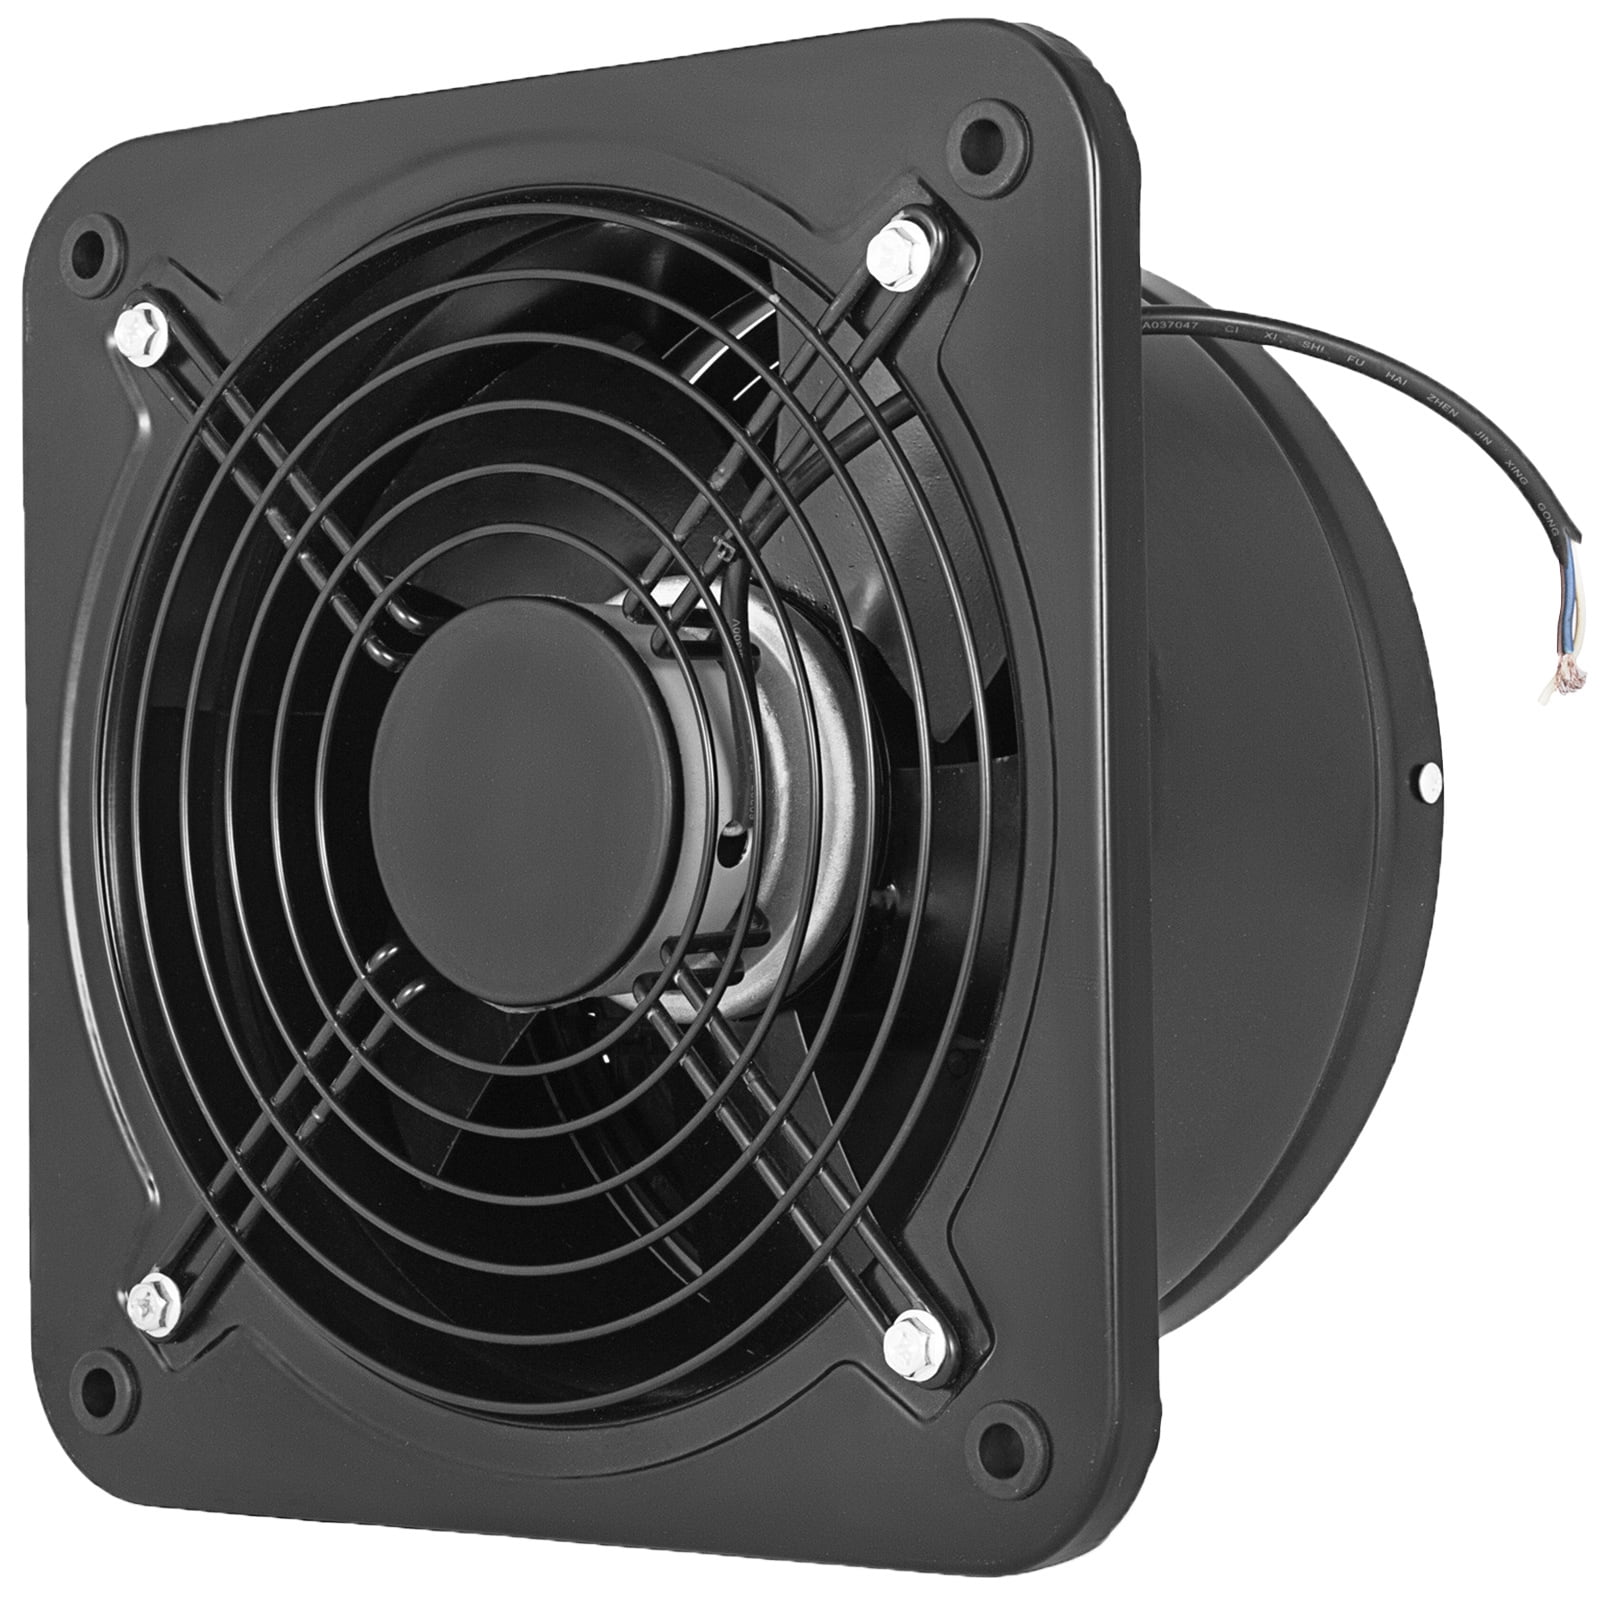 Industrial Wall Mounted Extractor Fan 12" Quiet Commercial Ventilation+Speed Ctr 